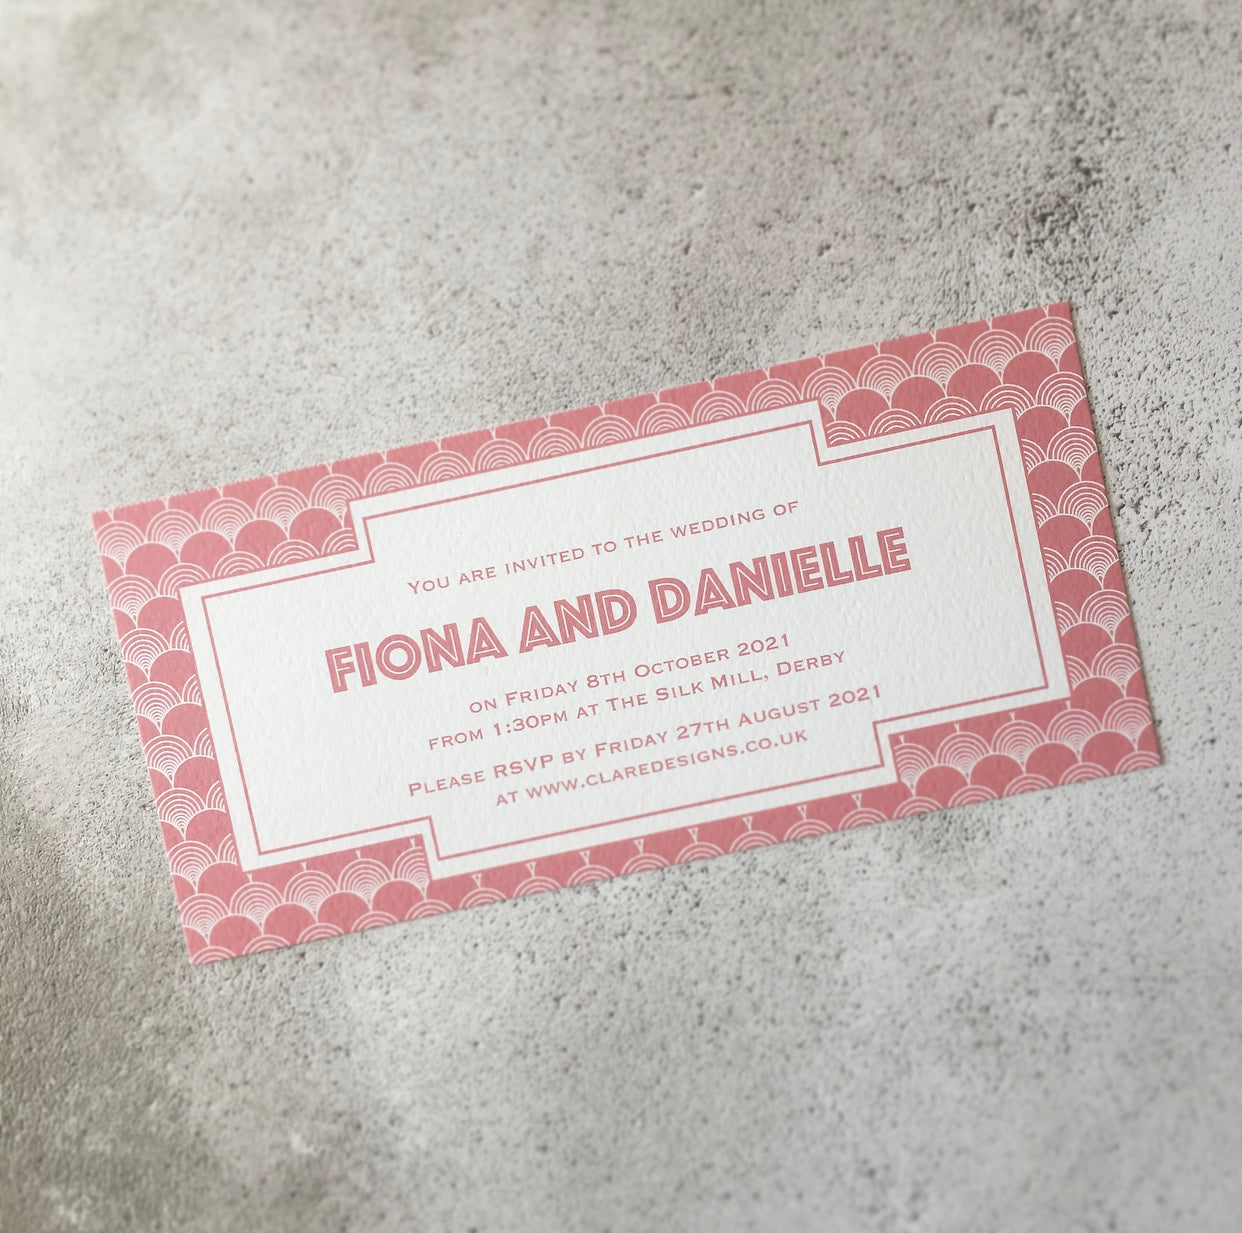 Bookmark-style wedding invitation. Gatsby-style patterned background, with all the wedding details written in a blush text inside a white geometric box.